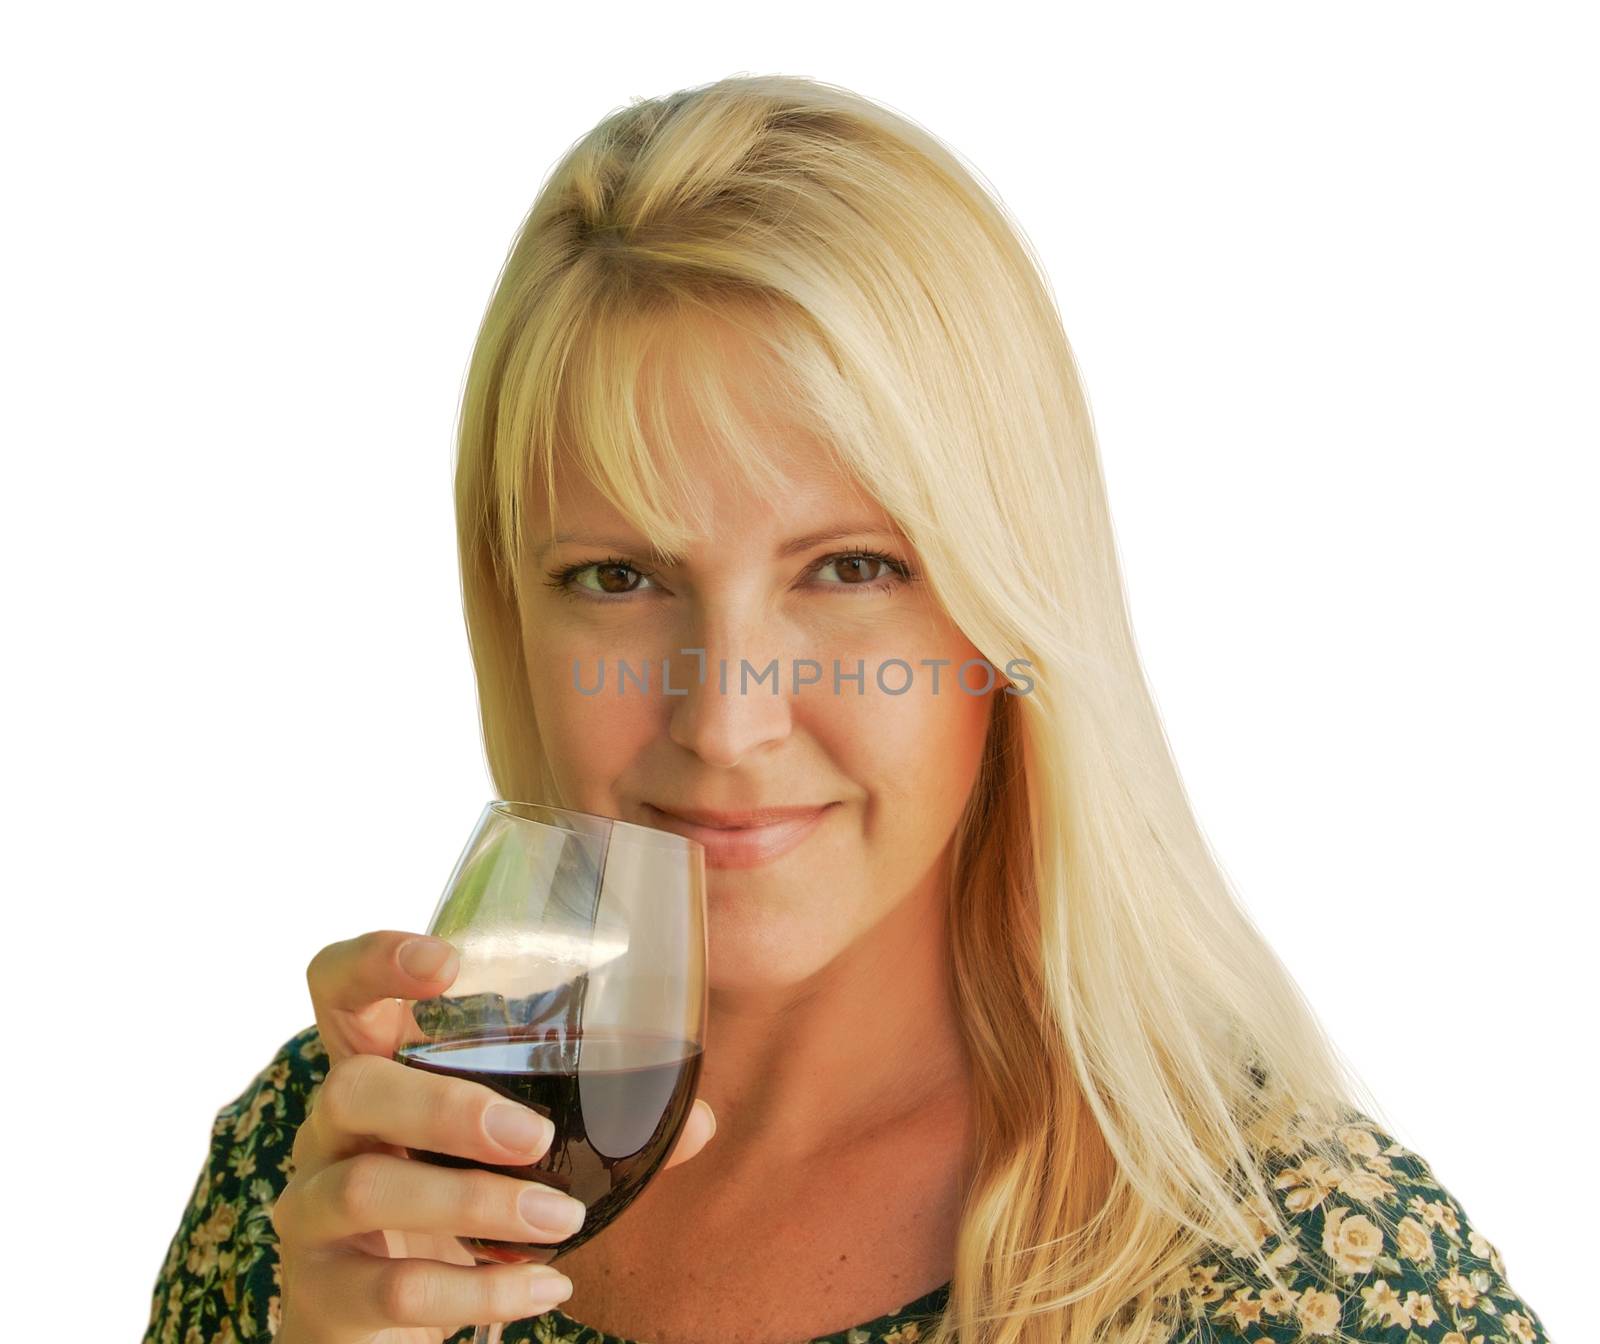 Attractive Woman Holding Wine Glass Isolated on White Background by Feverpitched